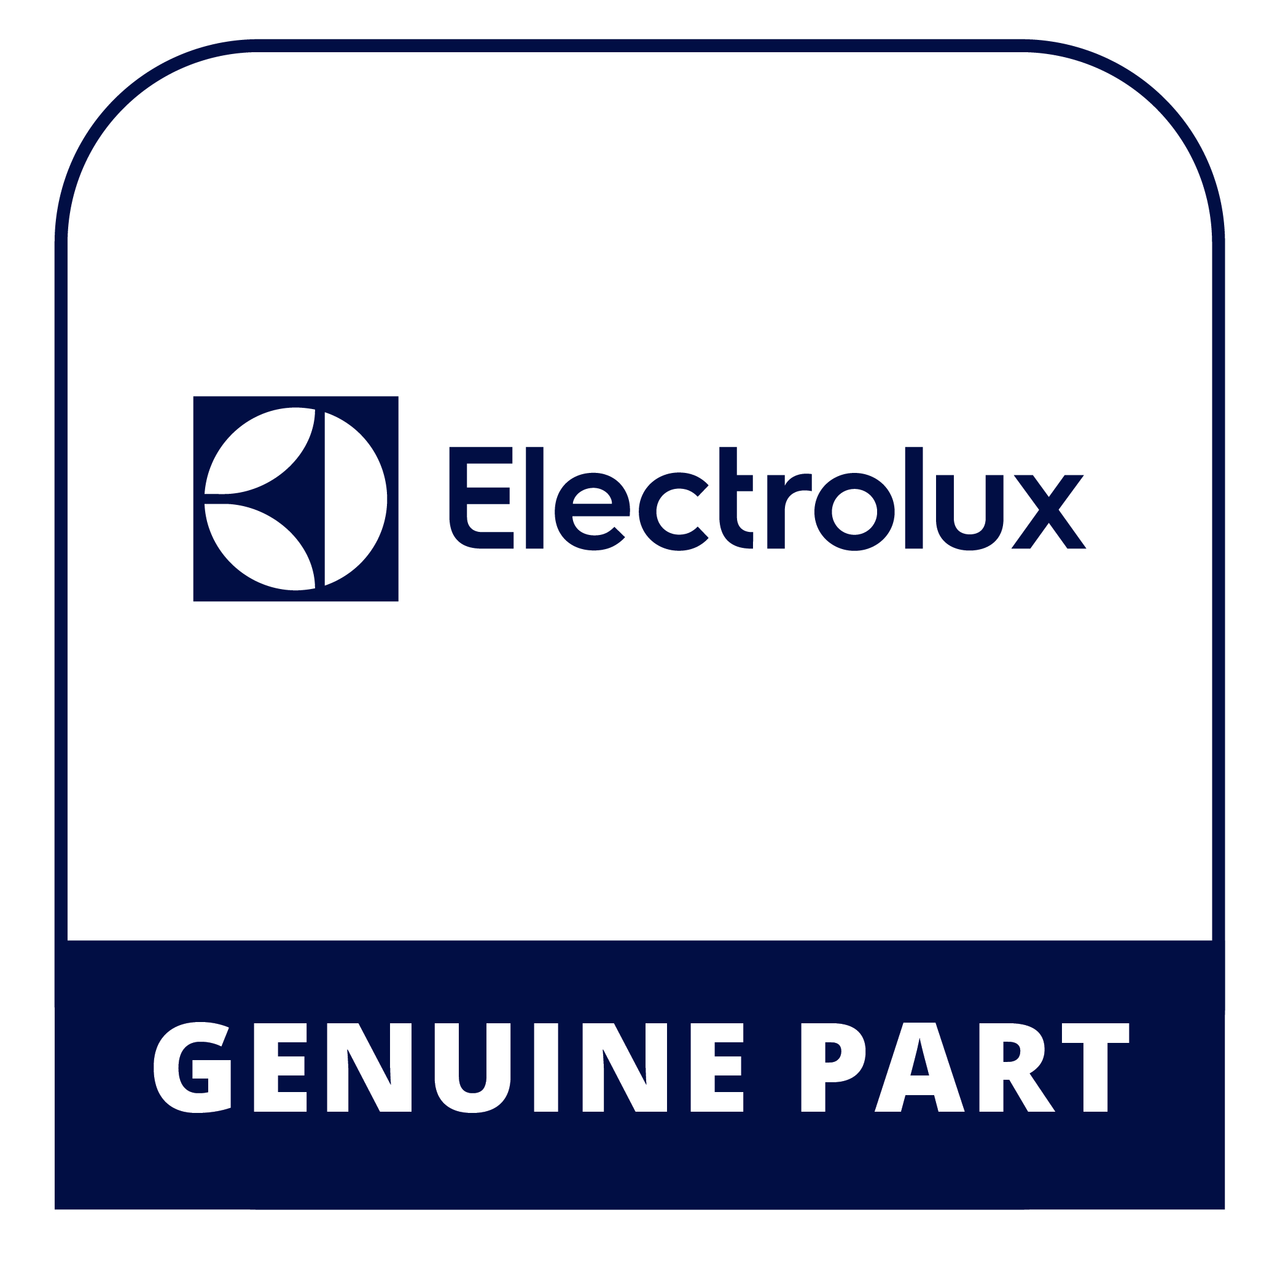 Frigidaire - Electrolux 139902500 Quick Start Guide - Genuine Electrolux Part